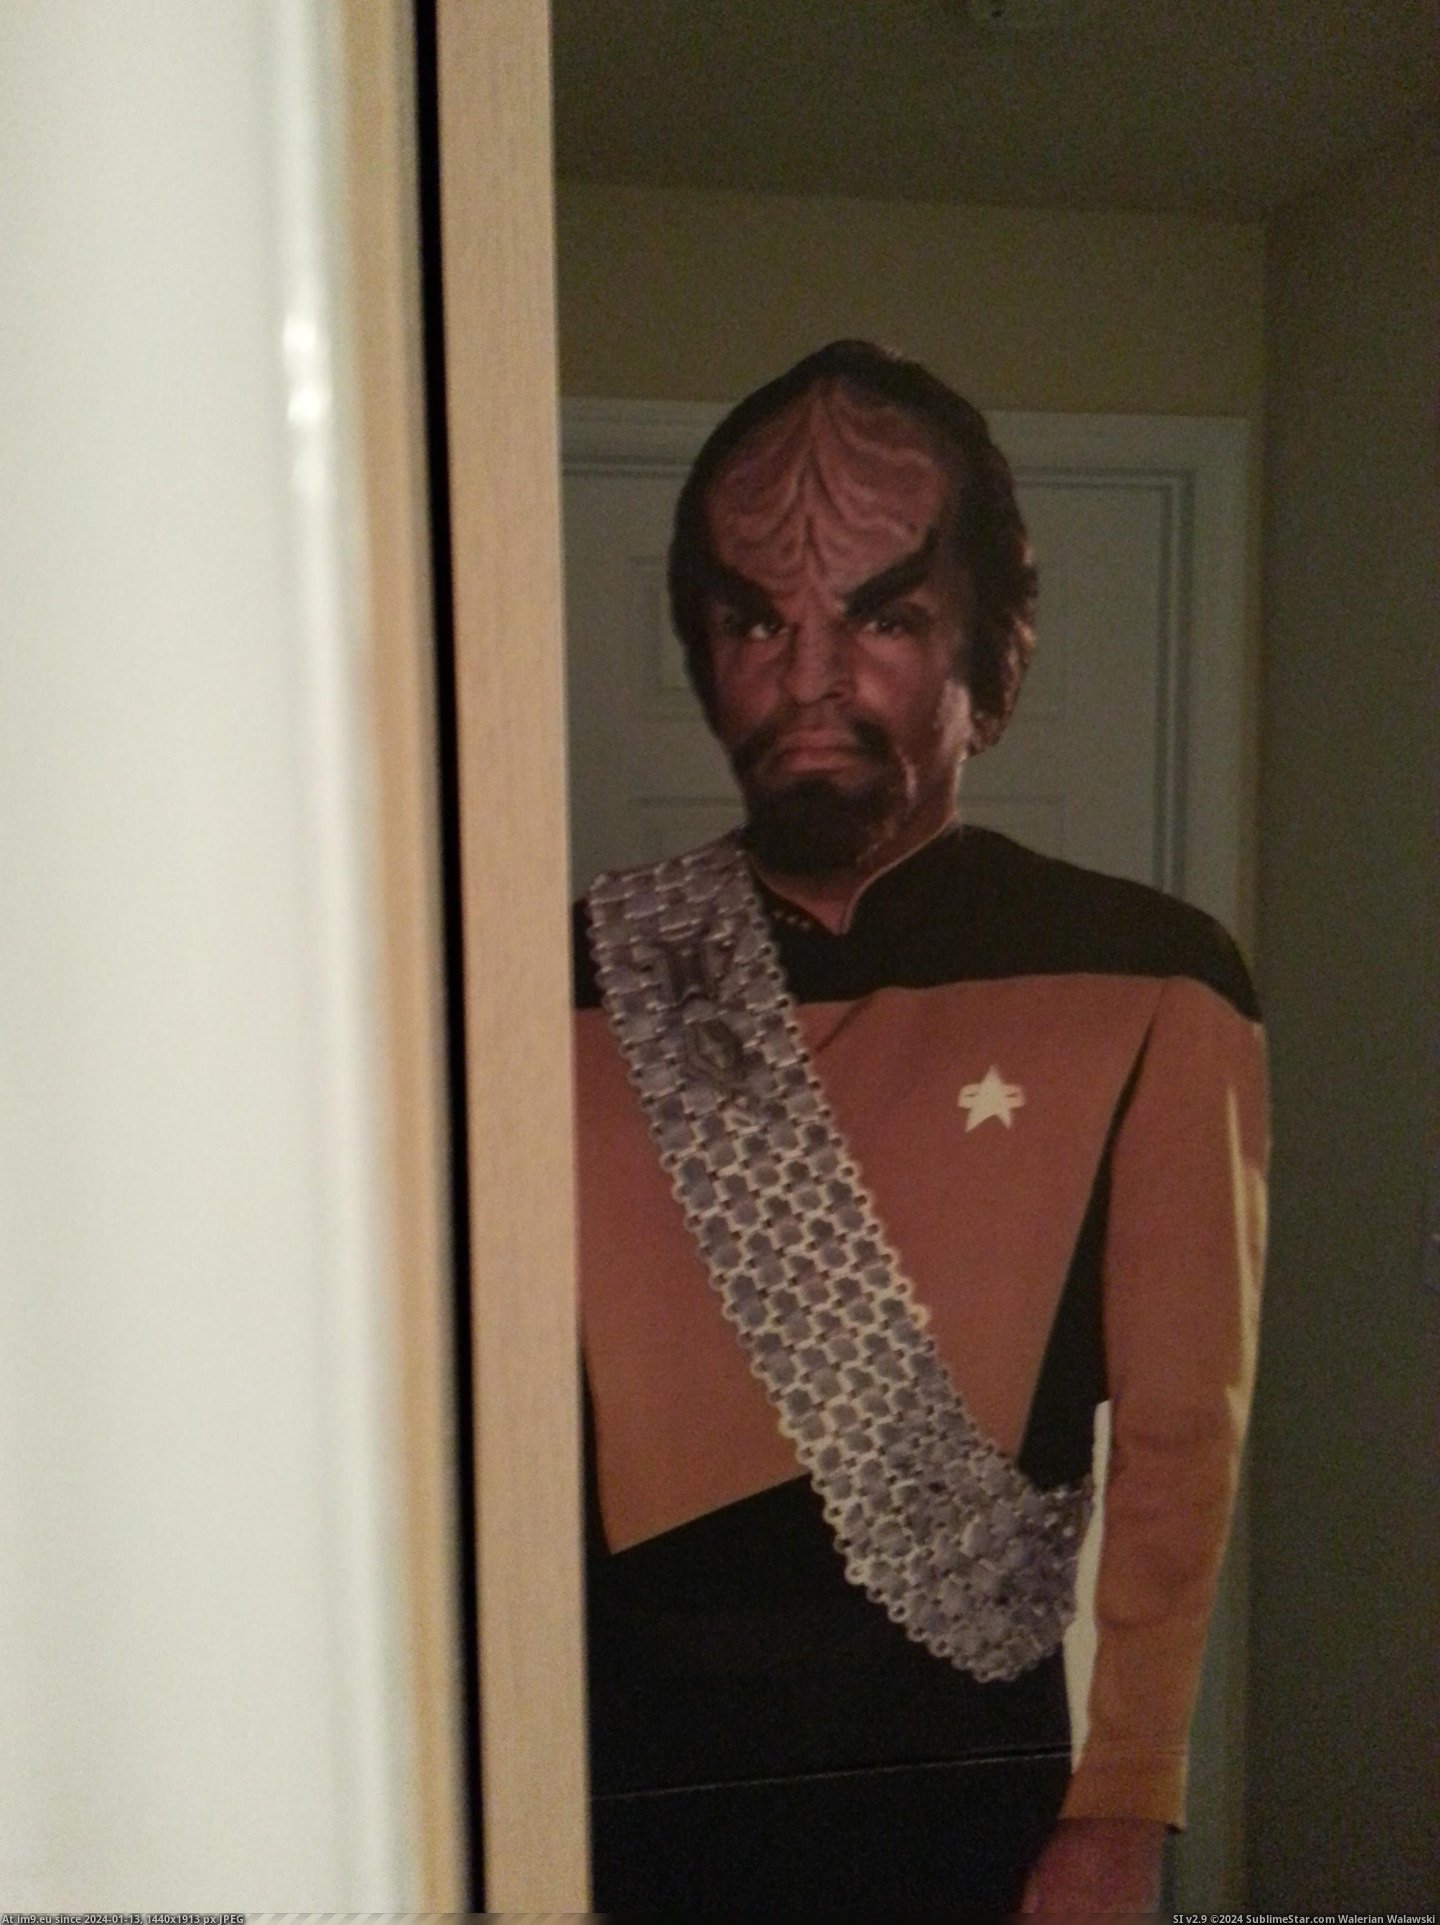 #Funny #Wife #Week #Scare #Sole #Worf #Bought #Moving #Purpose [Funny] I bought a 6 ft Worf for the sole purpose of moving him around to scare my wife once a week Pic. (Image of album My r/FUNNY favs))